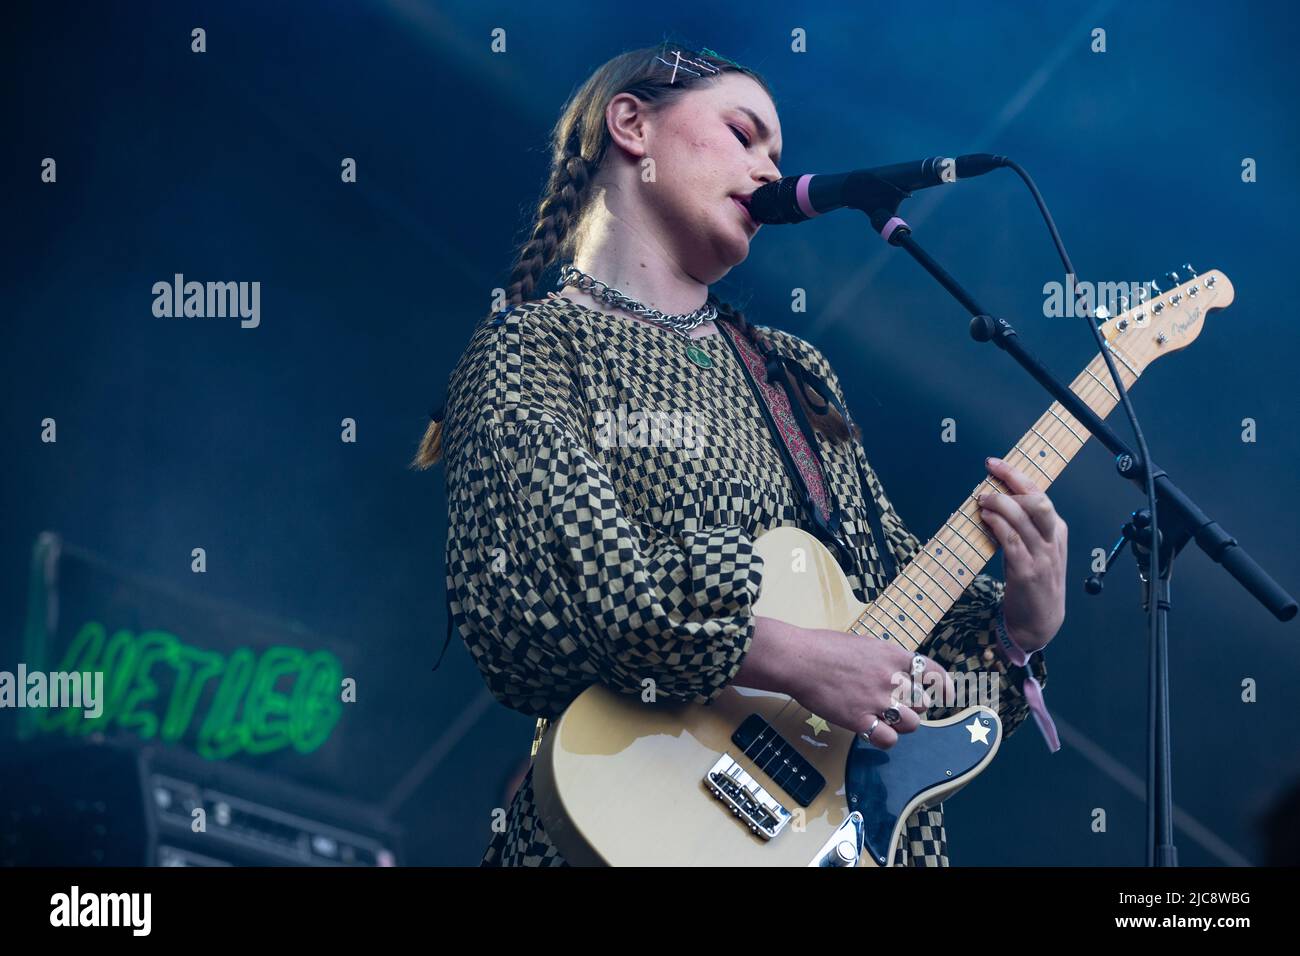 Oslo, Norway. 10th June, 2022. The British indie rock band Wet Leg performs  a live concert during the Norwegian music festival Loaded Festival 2022 in  Oslo. Here singer and musician Rhian Teasdale